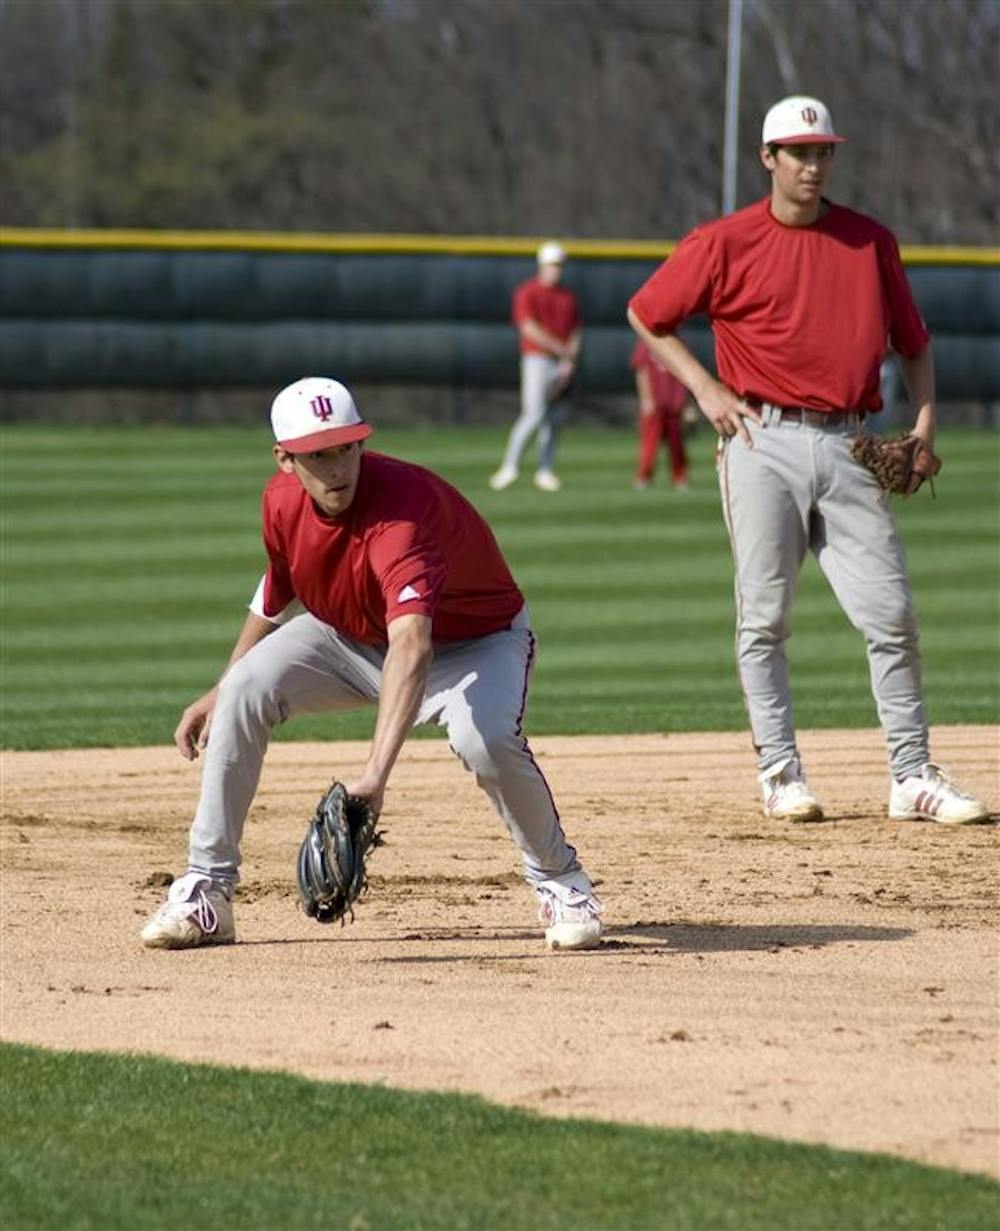 Shortstop Jake Dunning fields a ground ball at practice March 26 at Sembower Field. The baseball team will play Louisville at 4 p.m. today on the road.